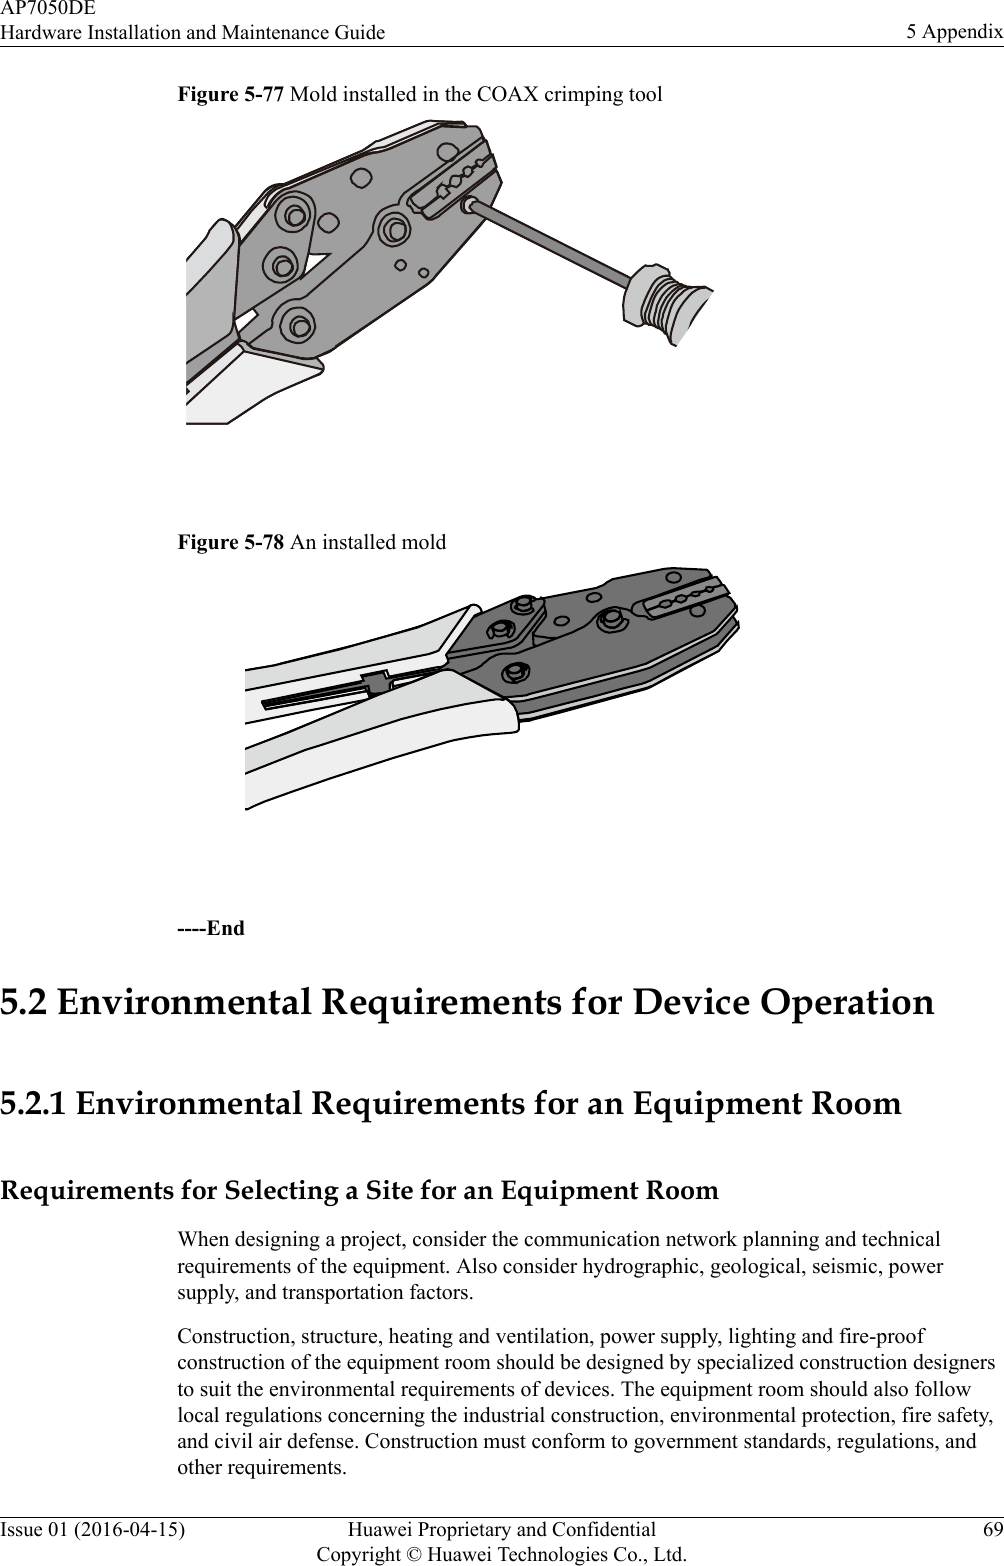 Figure 5-77 Mold installed in the COAX crimping tool Figure 5-78 An installed mold ----End5.2 Environmental Requirements for Device Operation5.2.1 Environmental Requirements for an Equipment RoomRequirements for Selecting a Site for an Equipment RoomWhen designing a project, consider the communication network planning and technicalrequirements of the equipment. Also consider hydrographic, geological, seismic, powersupply, and transportation factors.Construction, structure, heating and ventilation, power supply, lighting and fire-proofconstruction of the equipment room should be designed by specialized construction designersto suit the environmental requirements of devices. The equipment room should also followlocal regulations concerning the industrial construction, environmental protection, fire safety,and civil air defense. Construction must conform to government standards, regulations, andother requirements.AP7050DEHardware Installation and Maintenance Guide 5 AppendixIssue 01 (2016-04-15) Huawei Proprietary and ConfidentialCopyright © Huawei Technologies Co., Ltd.69